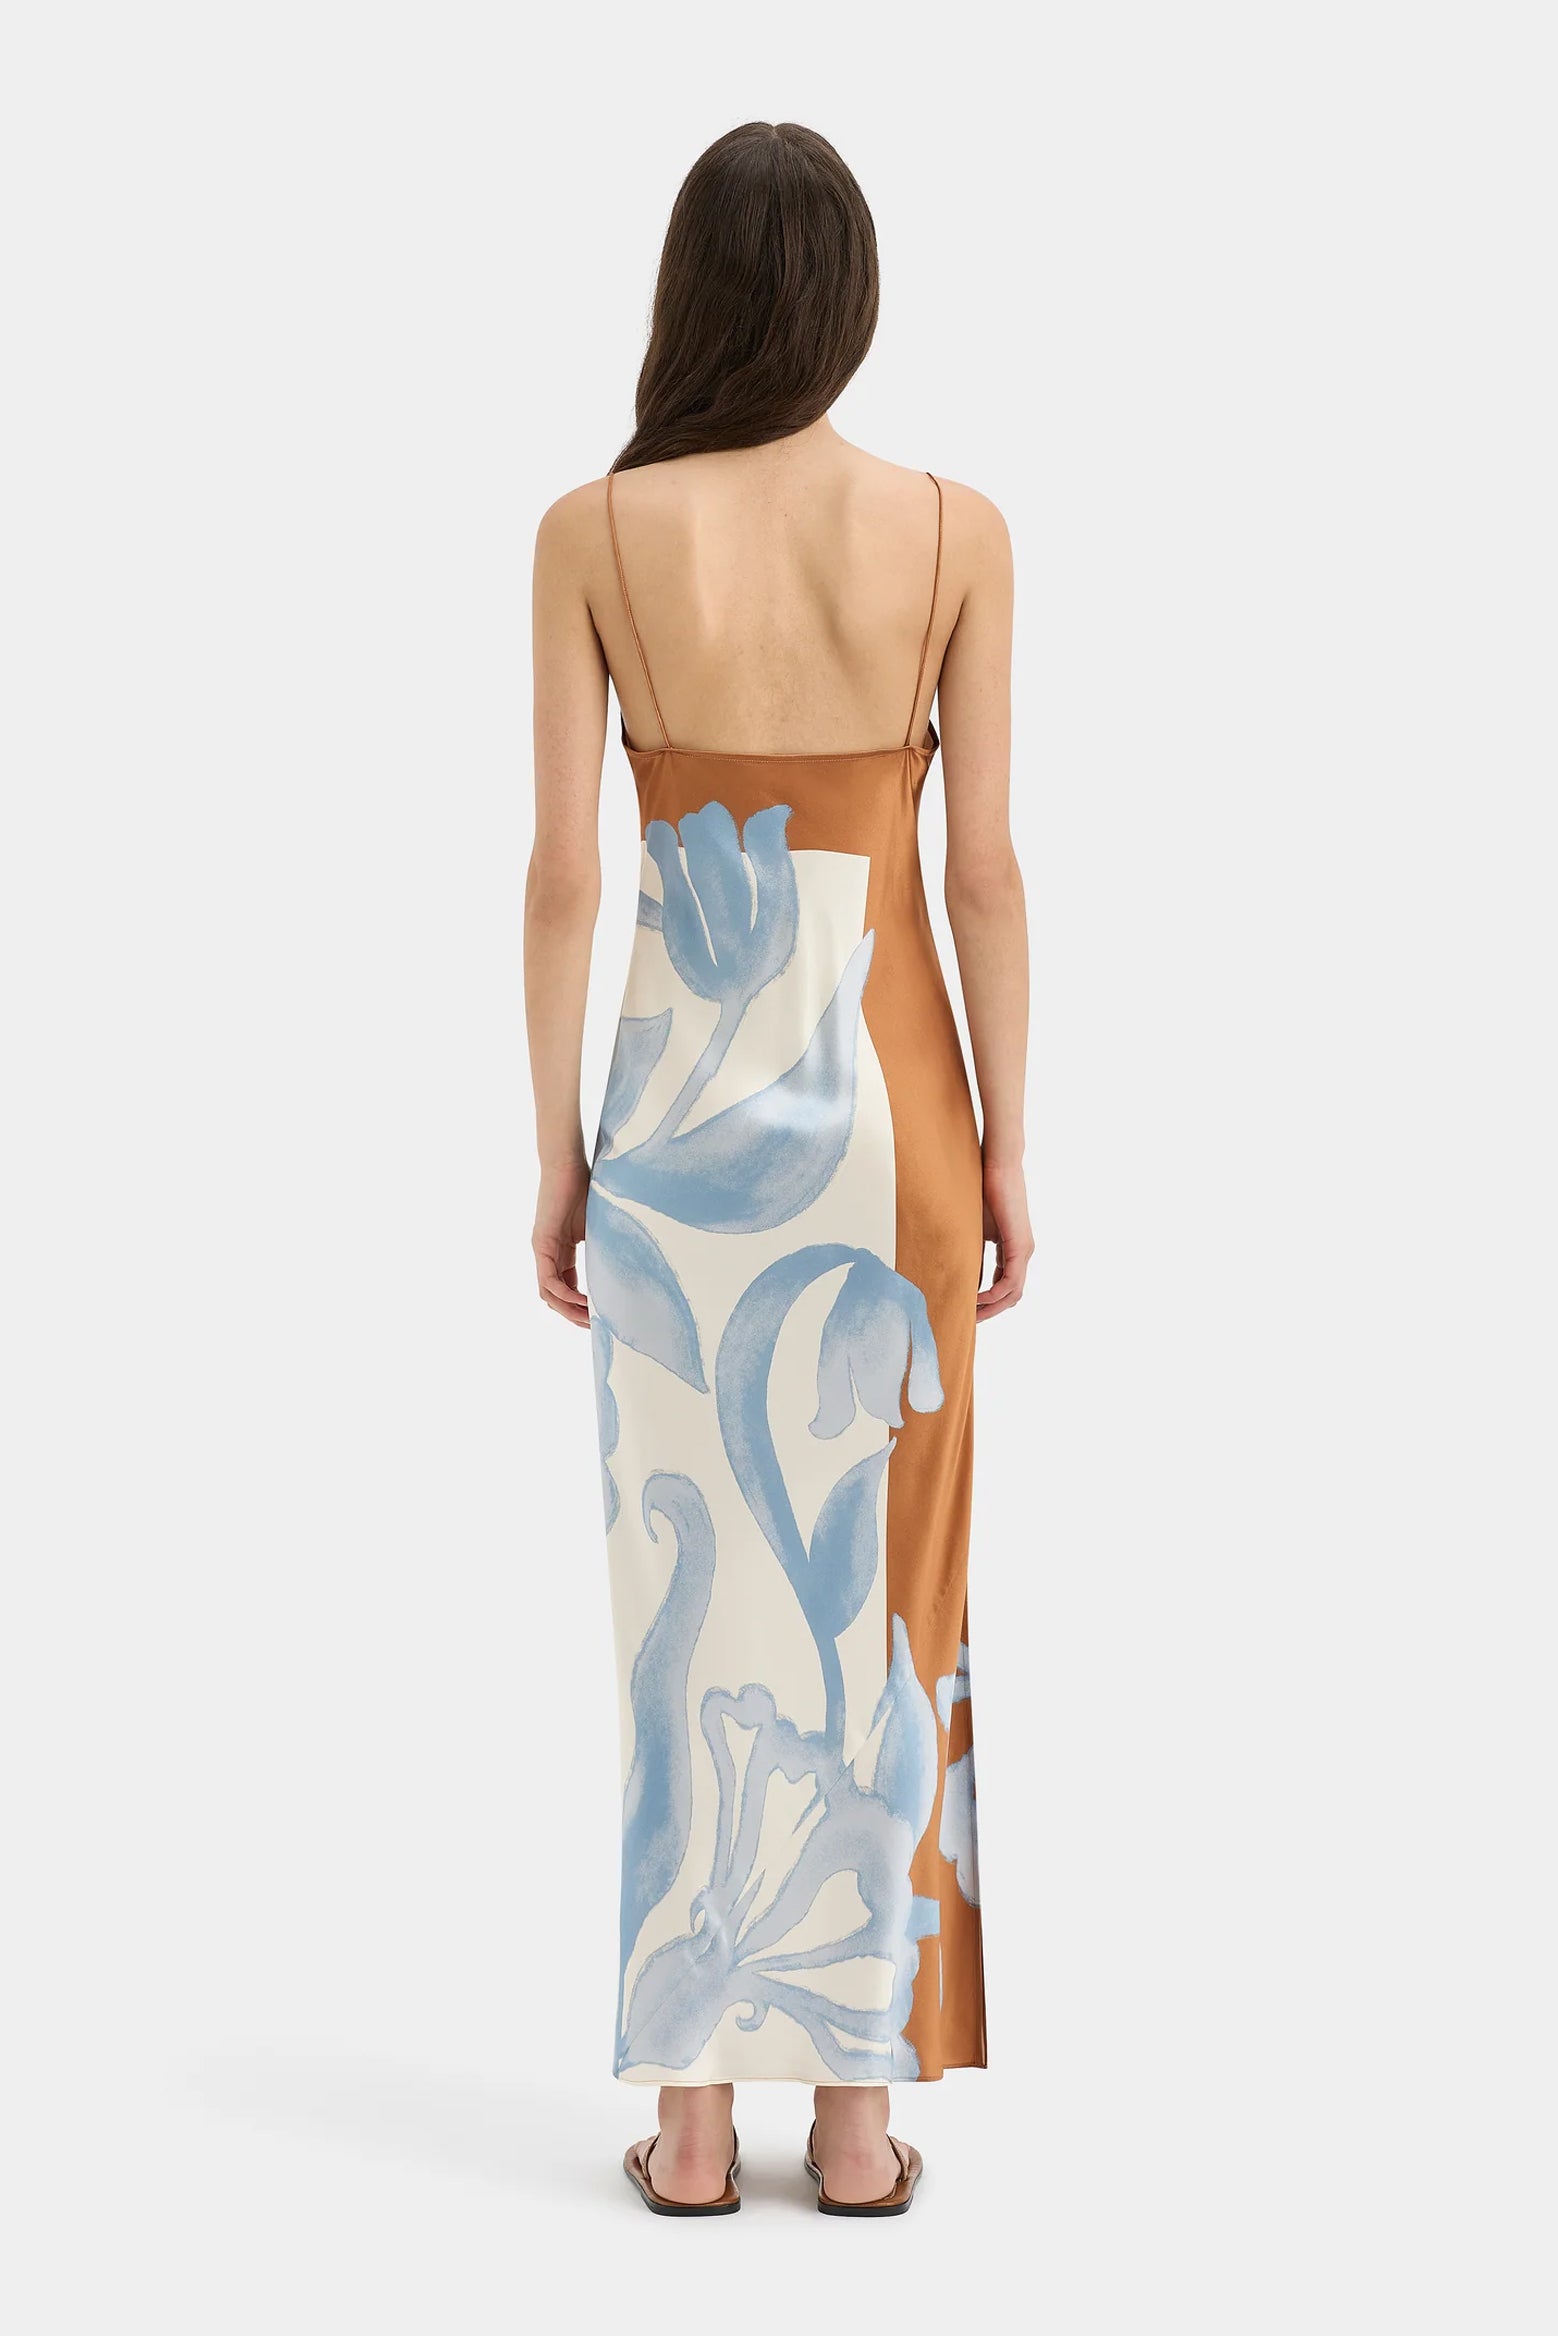 SIR Sorrento Slip Dress in Sciarpa Print available at The New Trend Australia.